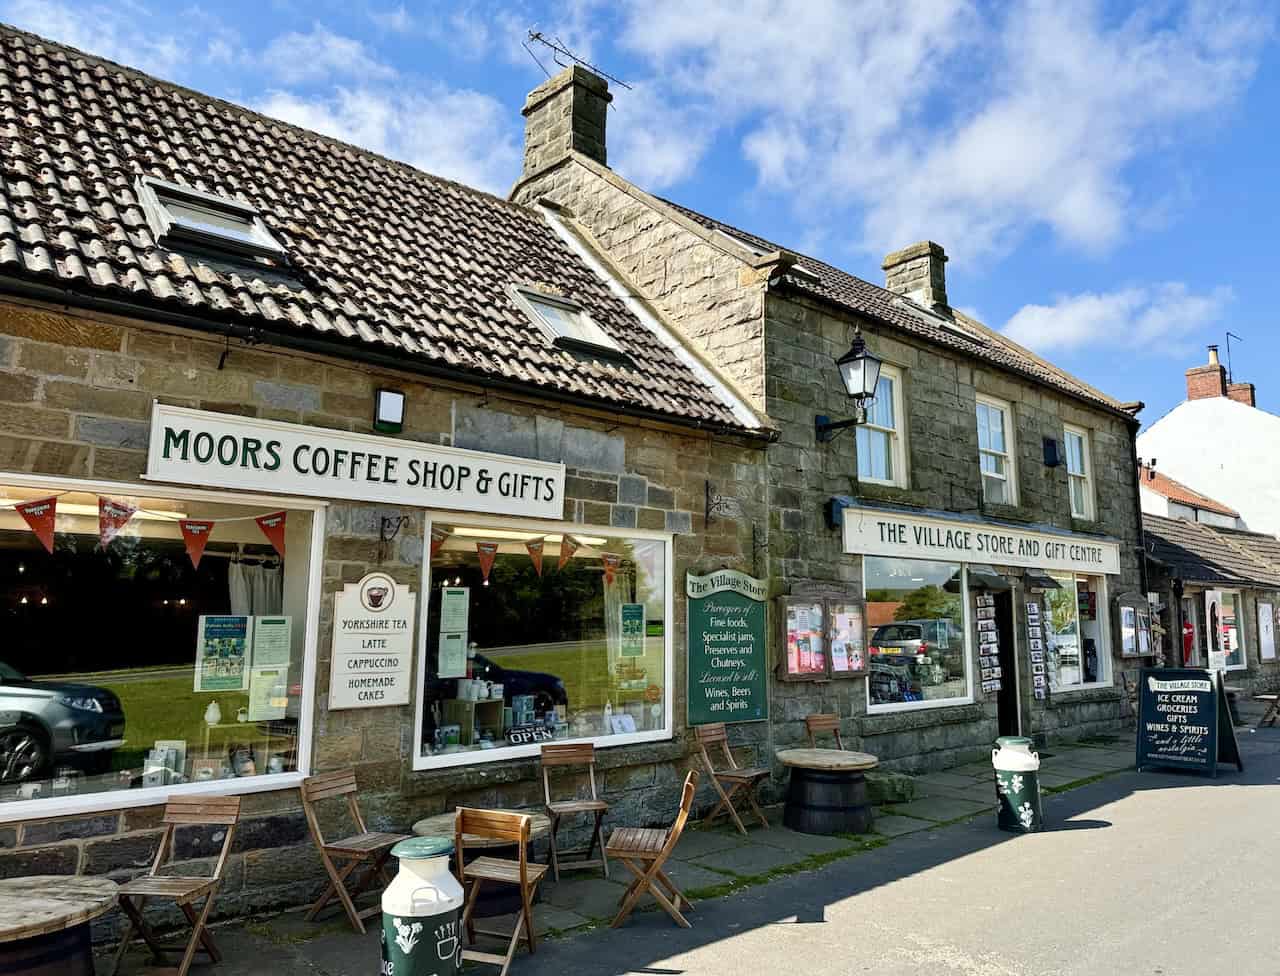 Moors Coffee Shop & Gifts and The Village Store and Gift Centre in Goathland, featuring charming stone buildings. The coffee shop serves various drinks and homemade cakes, while the village store offers fine foods and beverages.
